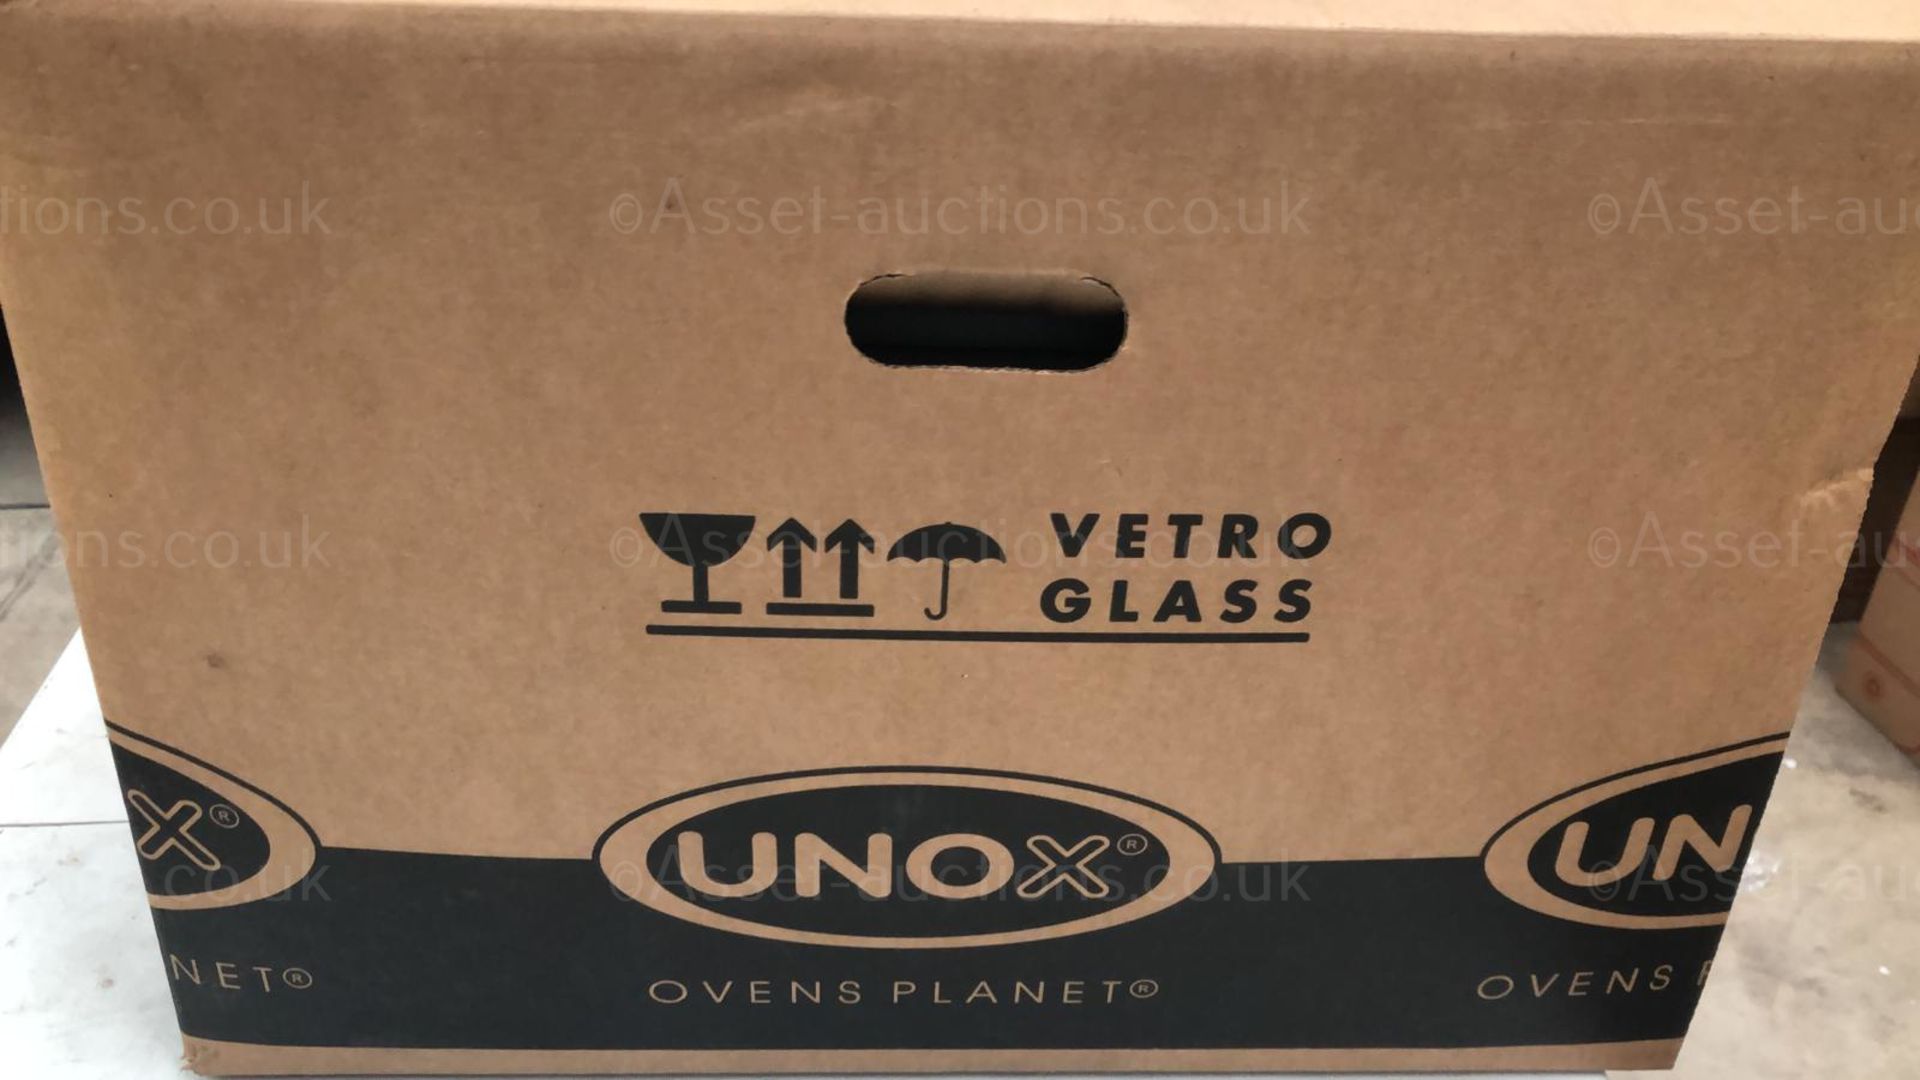 NEW UNOX Linemicro Roberta Bakery Oven, with box *PLUS VAT* - Image 4 of 4